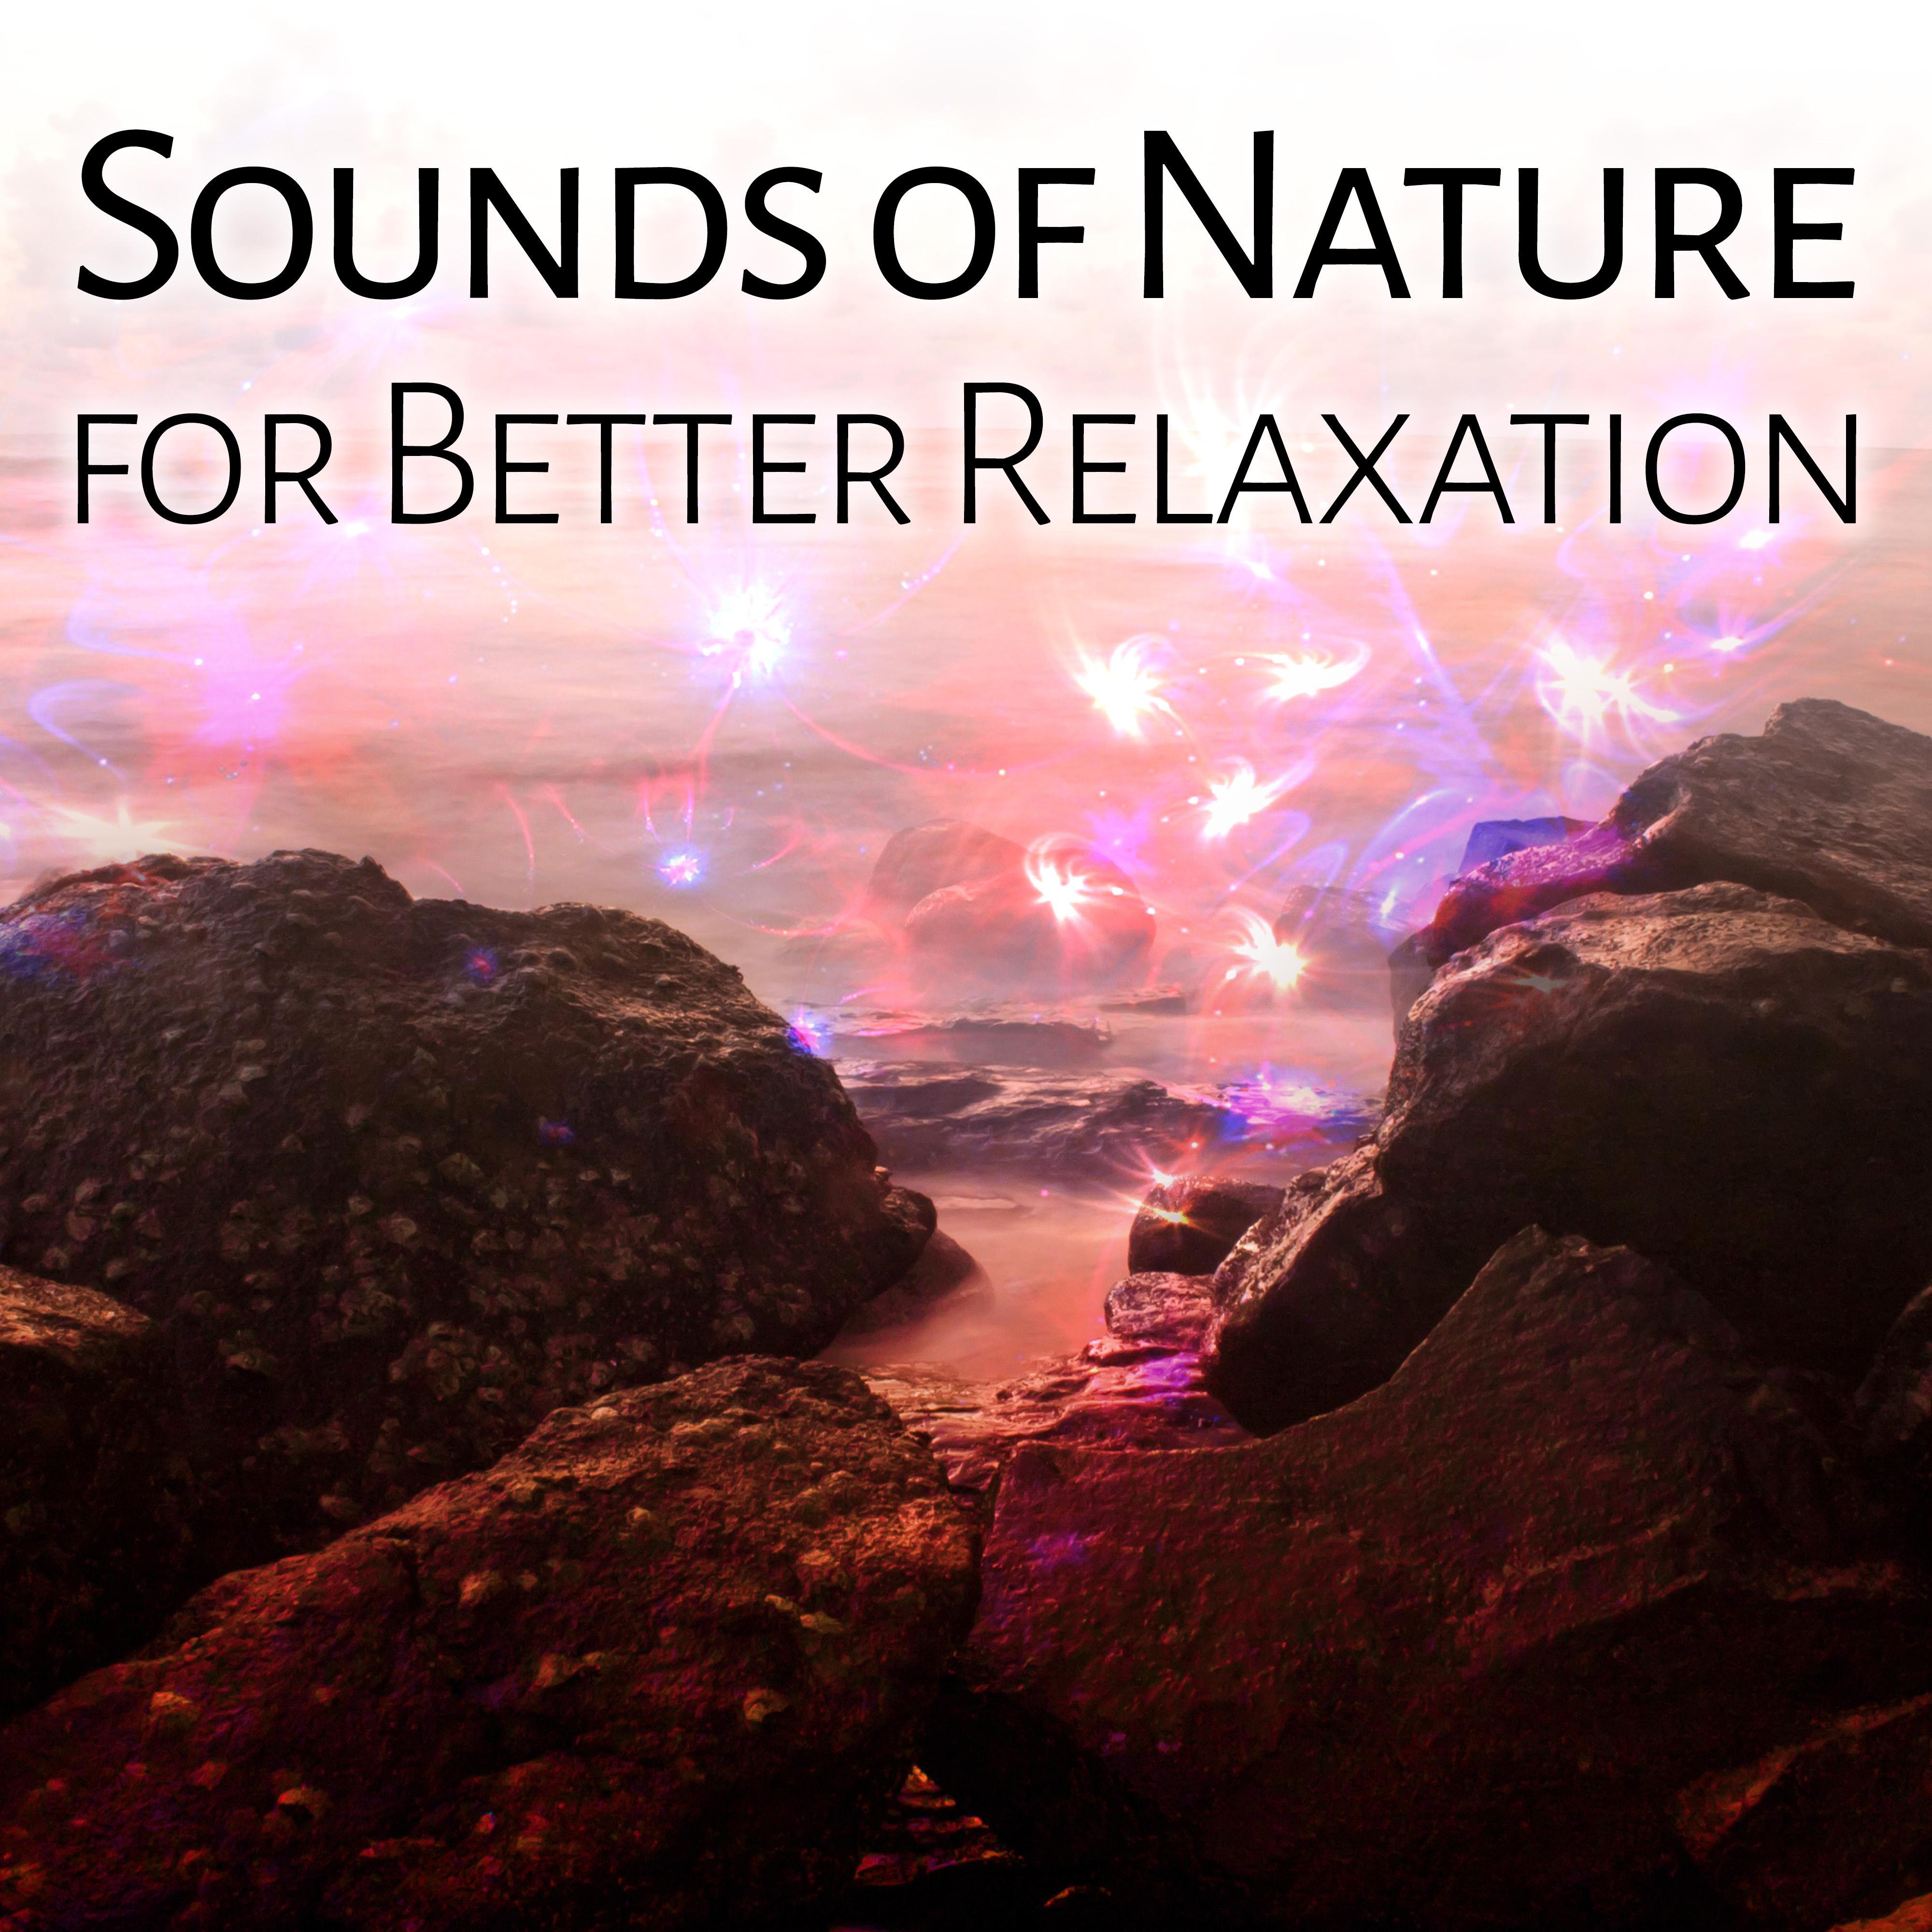 Sounds of Nature for Better Relaxation  Birds Music, Nature Sounds, Deep Sleep, Peaceful Mind, Stress Relief